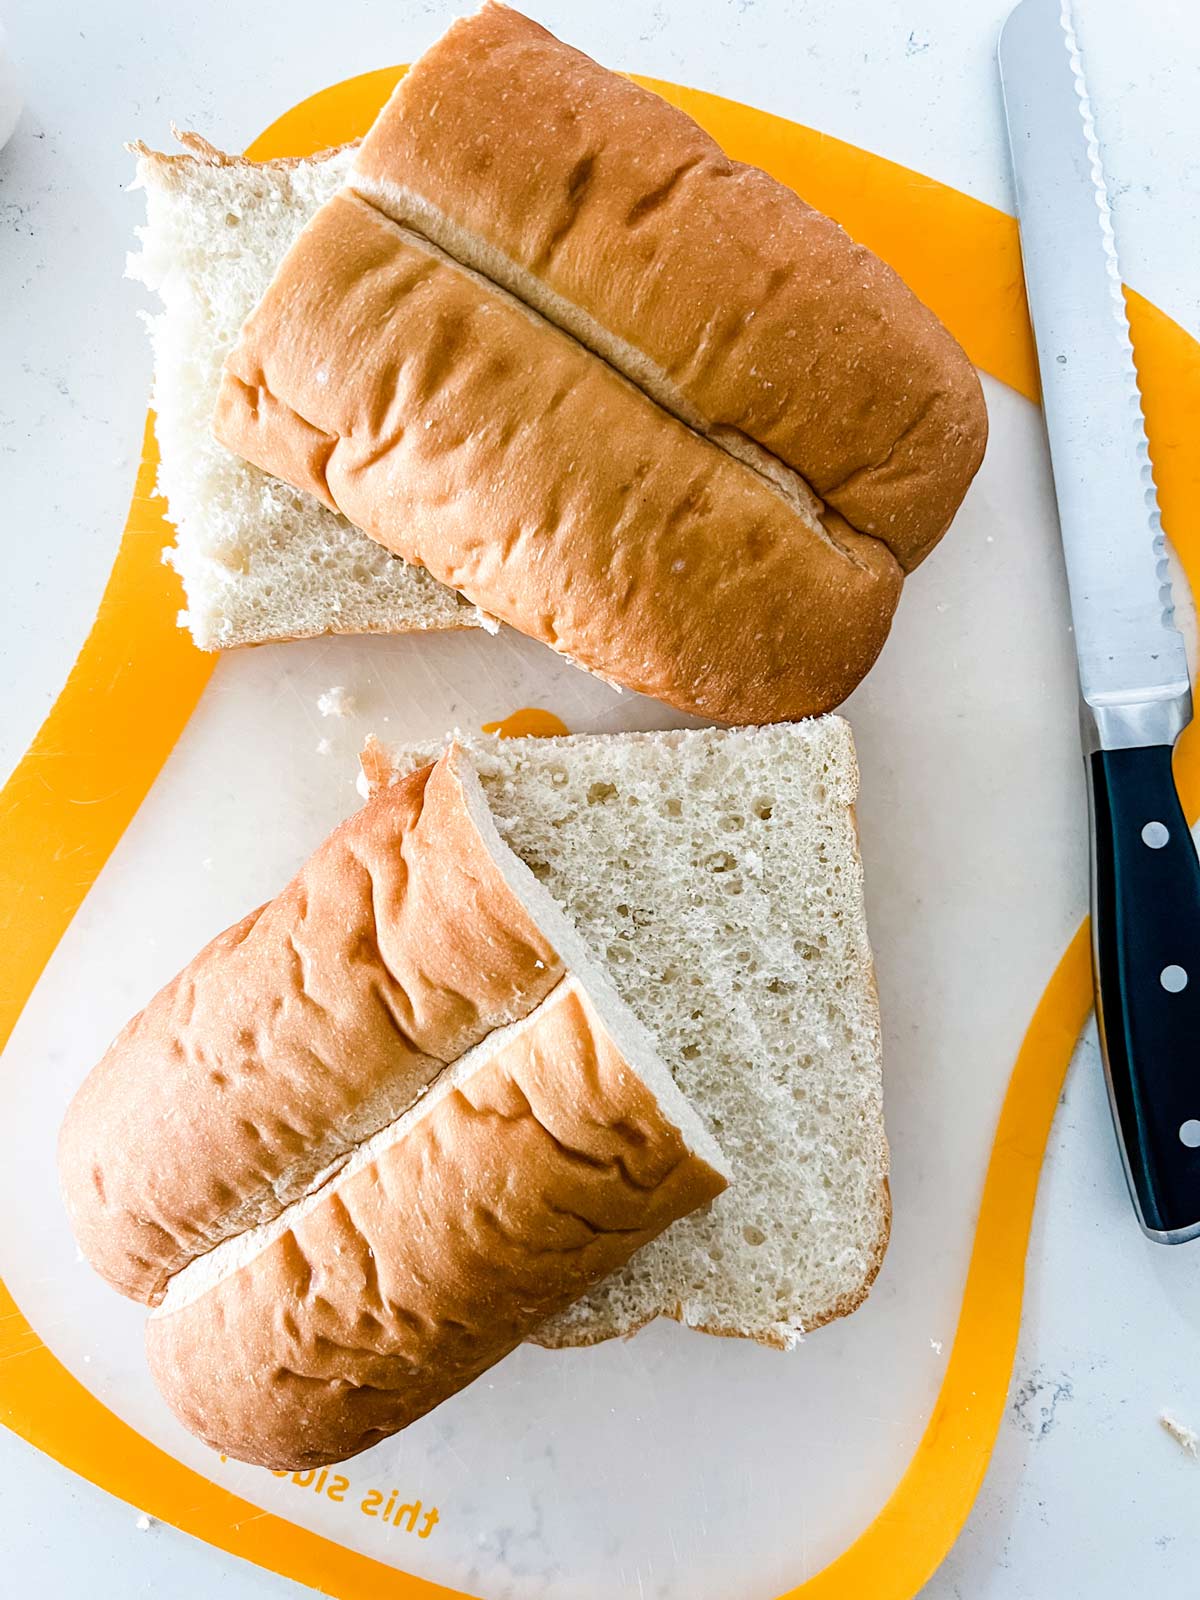 A loaf of Italian bread sliced in half lengthwise and through the middle.